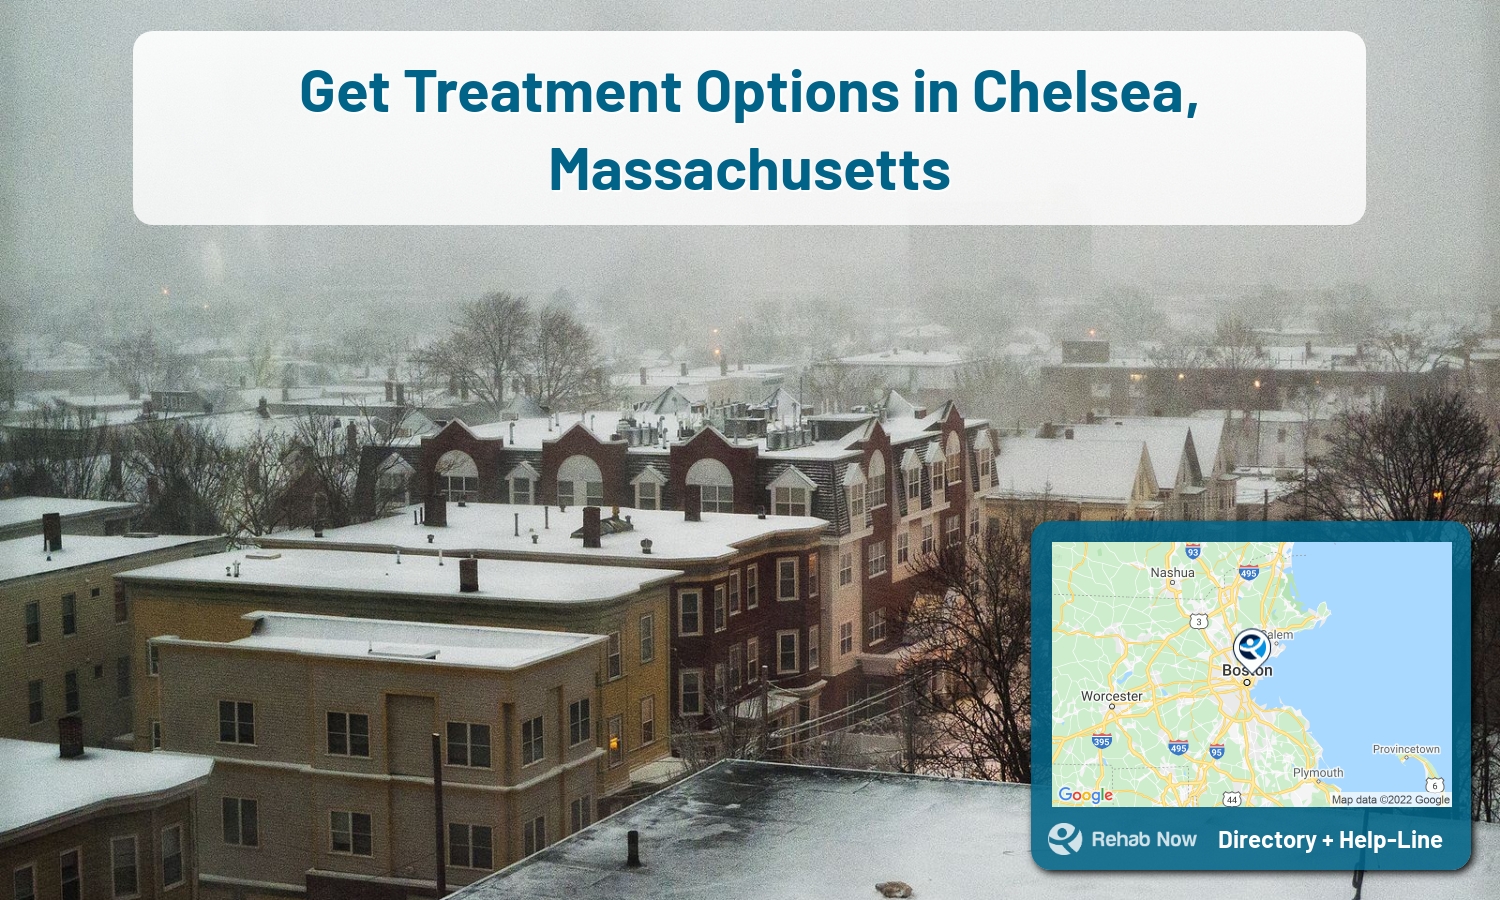 Our experts can help you find treatment now in Chelsea, Massachusetts. We list drug rehab and alcohol centers in Massachusetts.